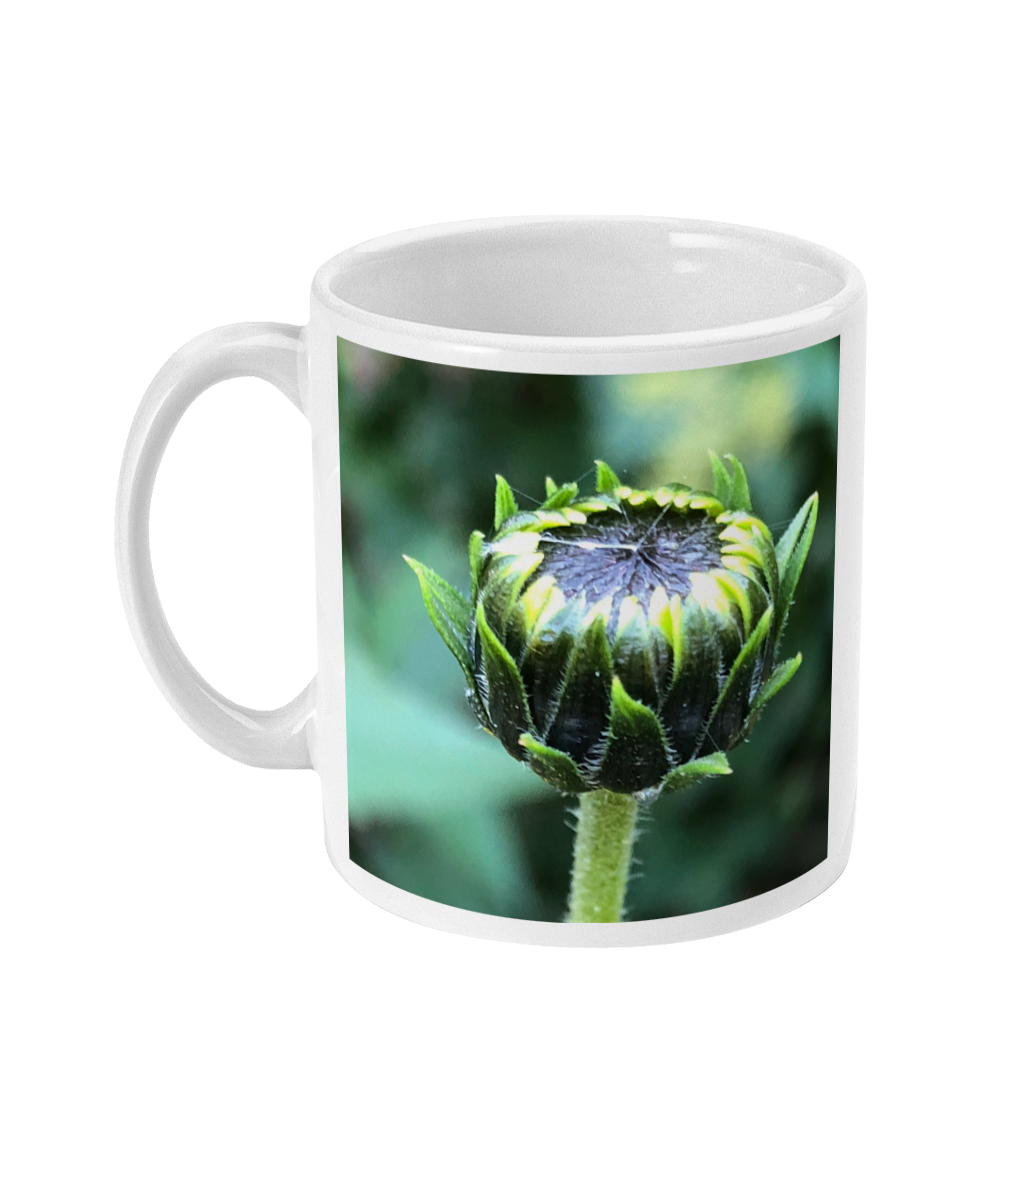 "The next flower waiting to happen" Green Bud Double Flower Mug - Nature of Flowers